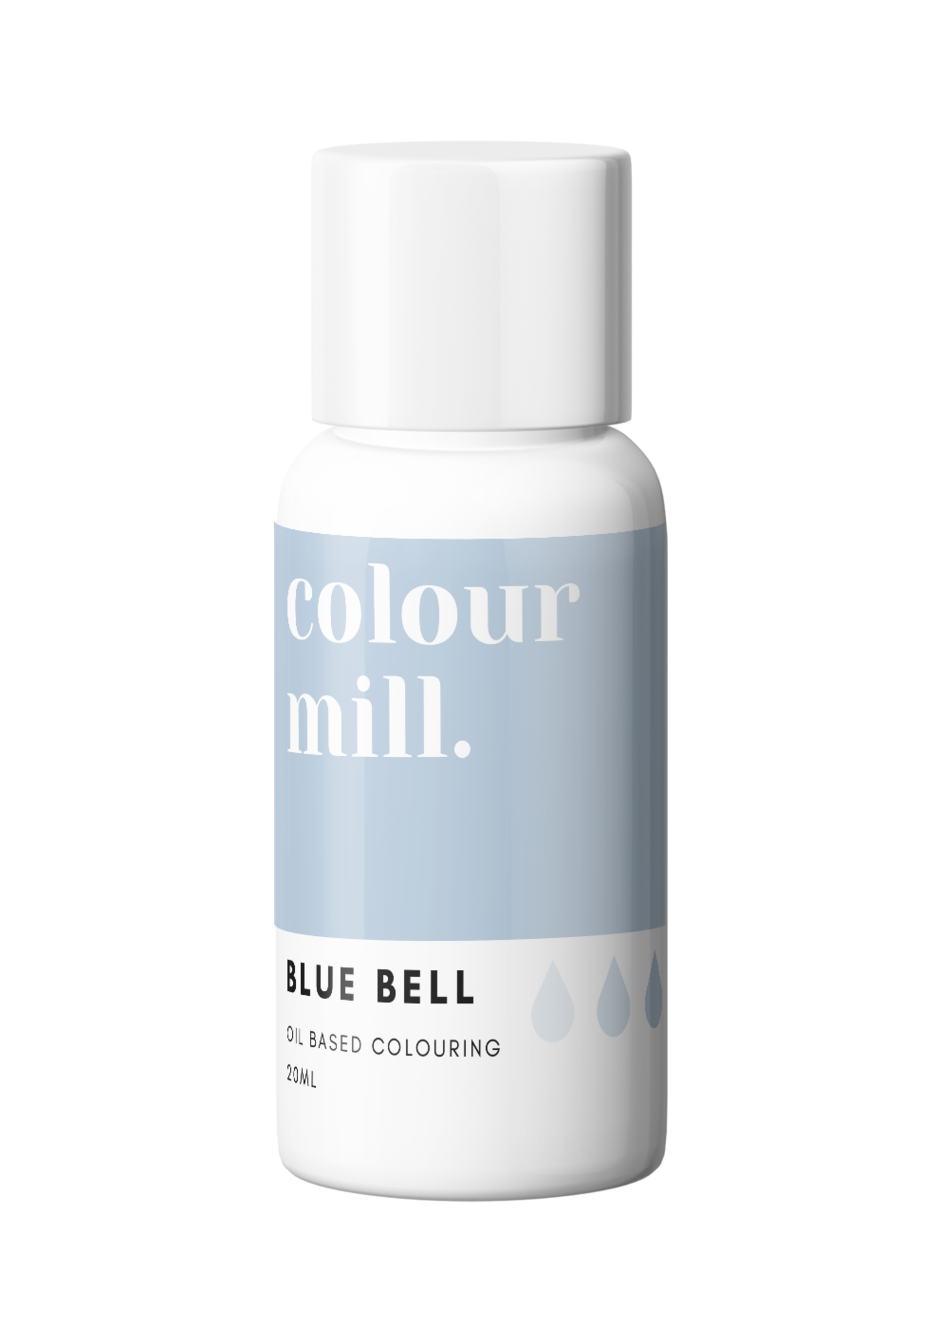 Blue Bell, 20ml, Colour Mill Oil Based Colouring